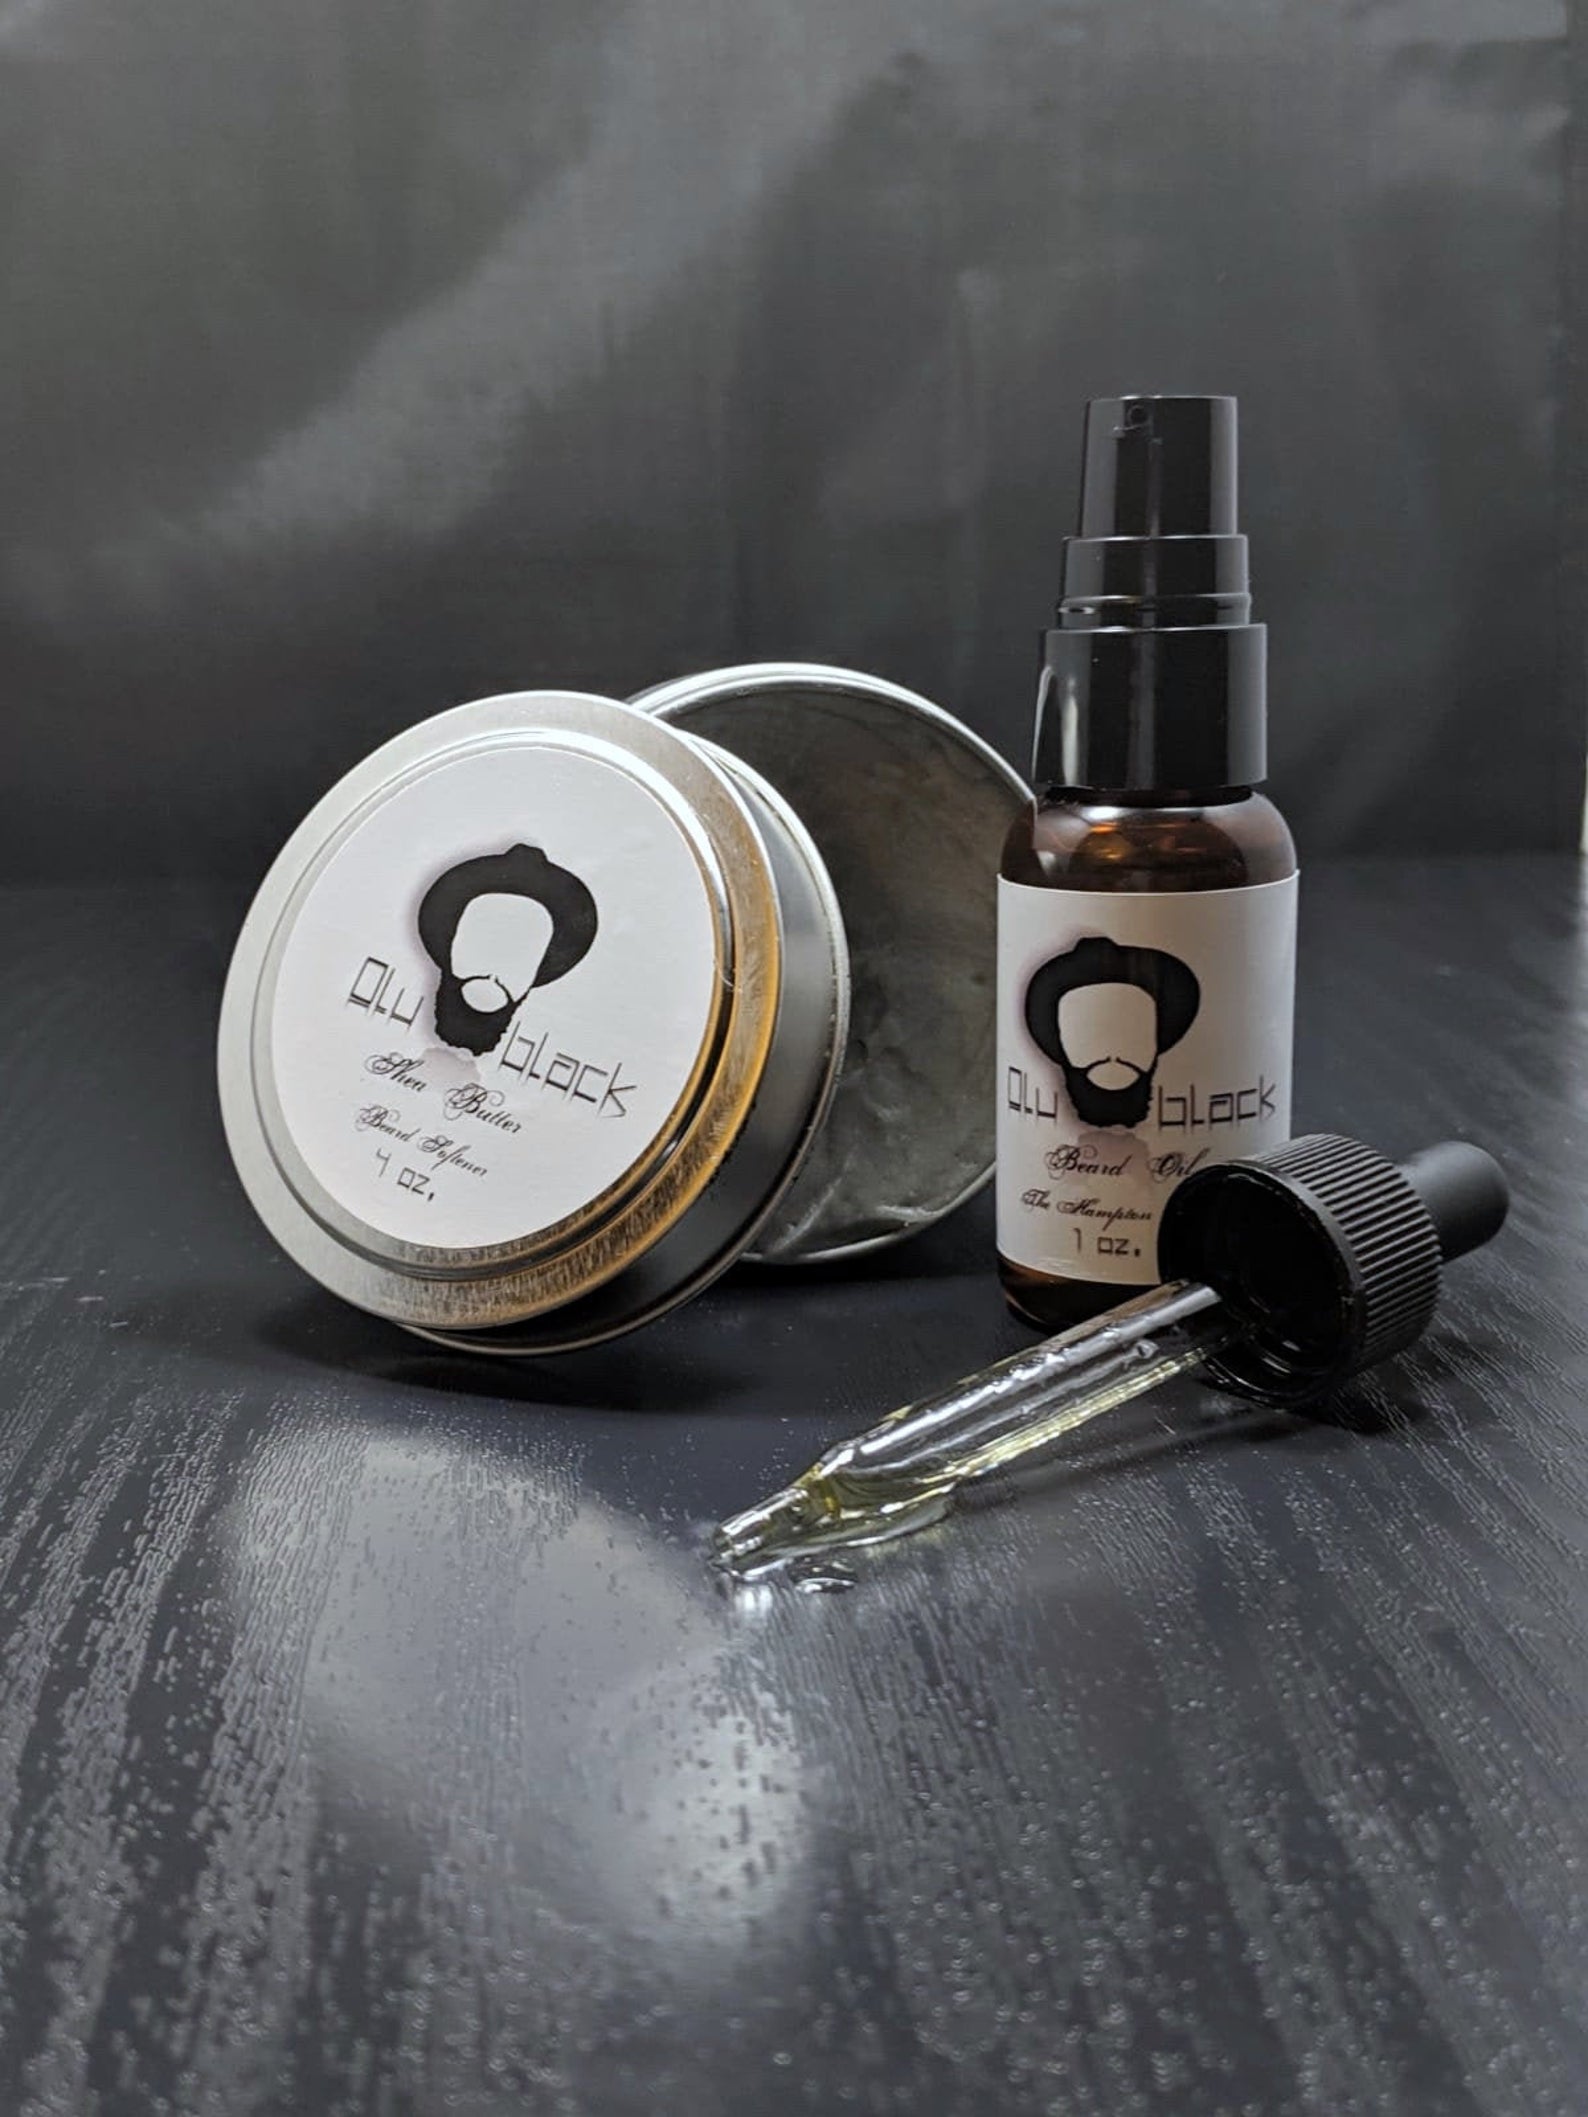 Best gifts for men: Olublack Organic Beard and Skin Set | Small Business Holiday Gifts 2020